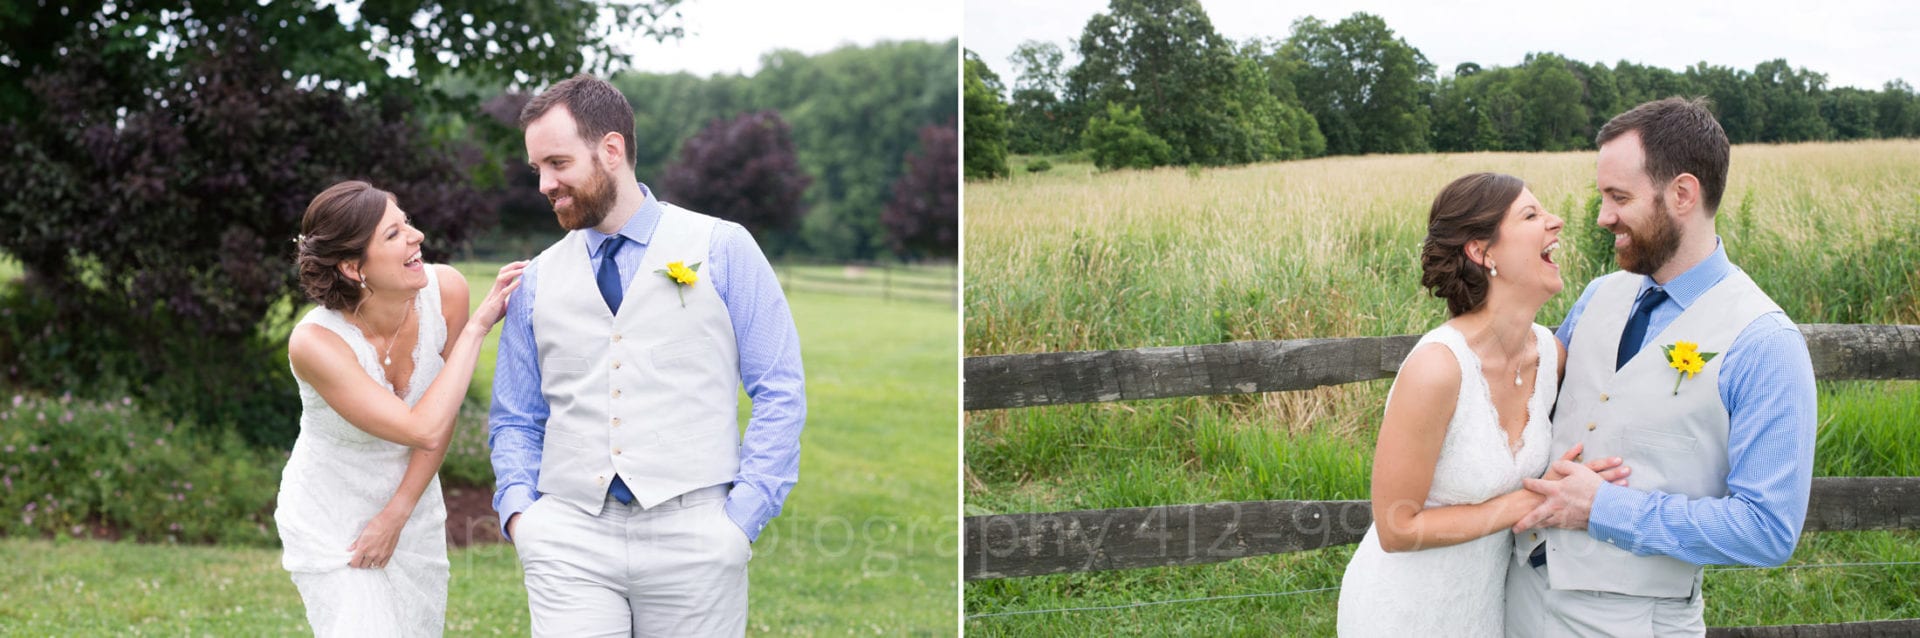 Two photos: A groom wearing a tan vest and a blue shirt stands with his hand in his pocket as he looks to the left where his bride holds on to his other arm and laughs. The second photo shows them embracing in front of a split rail fence with a field of high grass behind it.